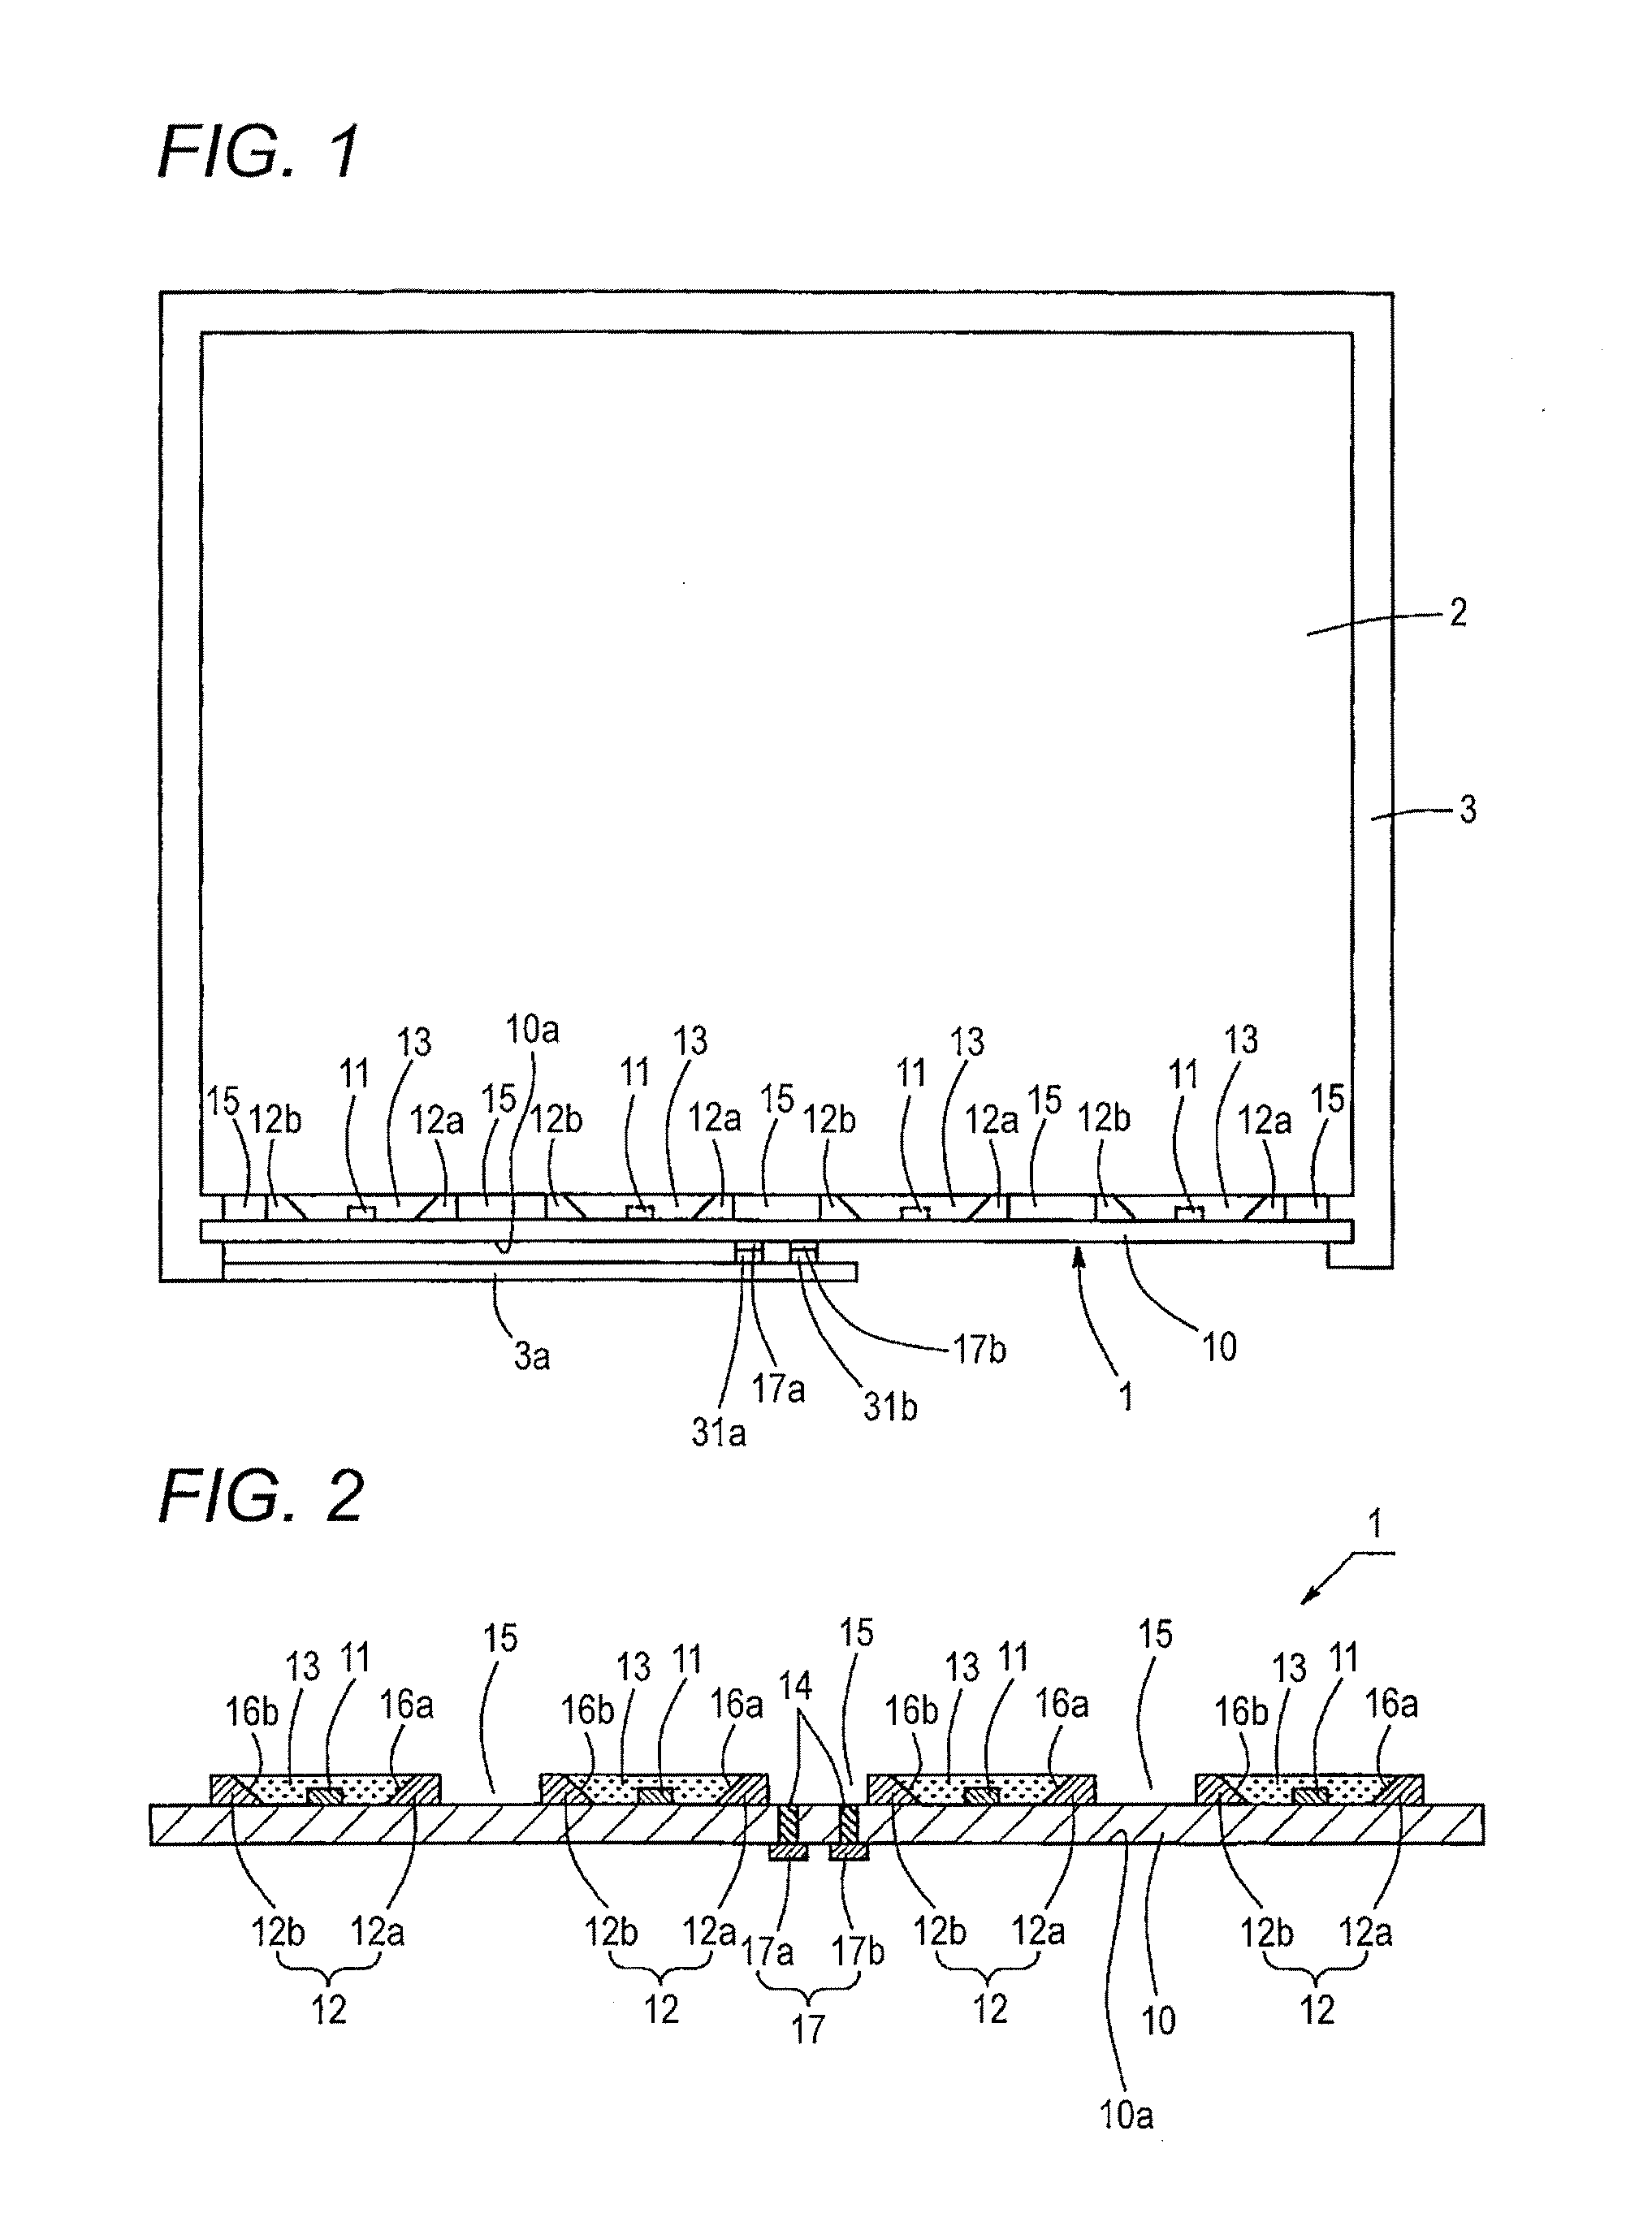 Linear light source device and planar light source device